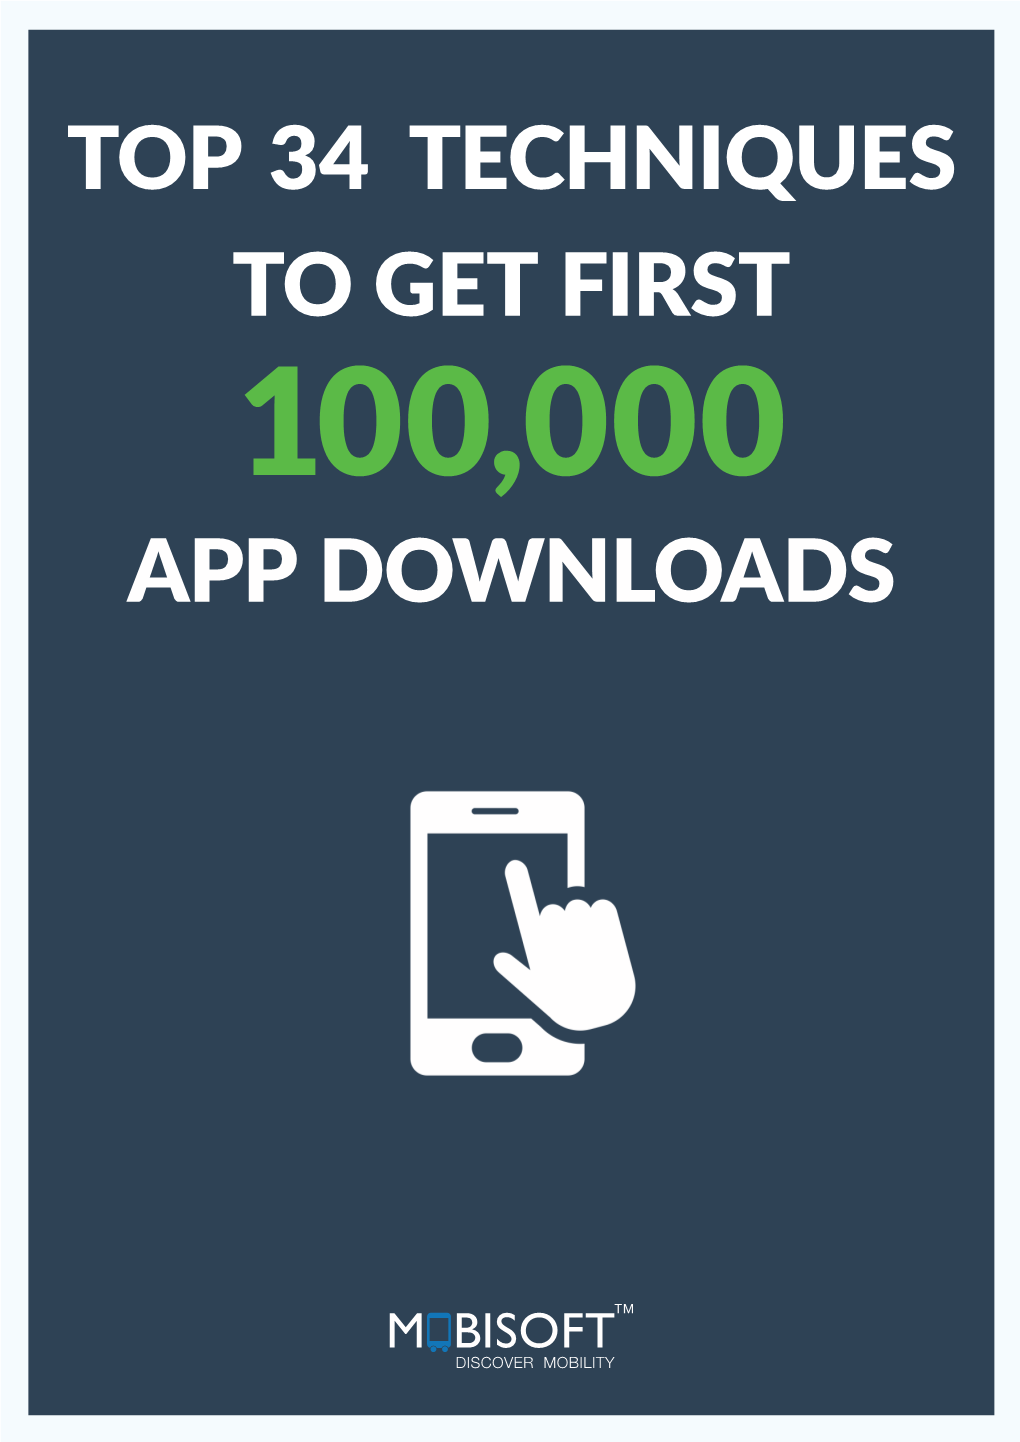 Top 34 Techniques to Get First App Downloads